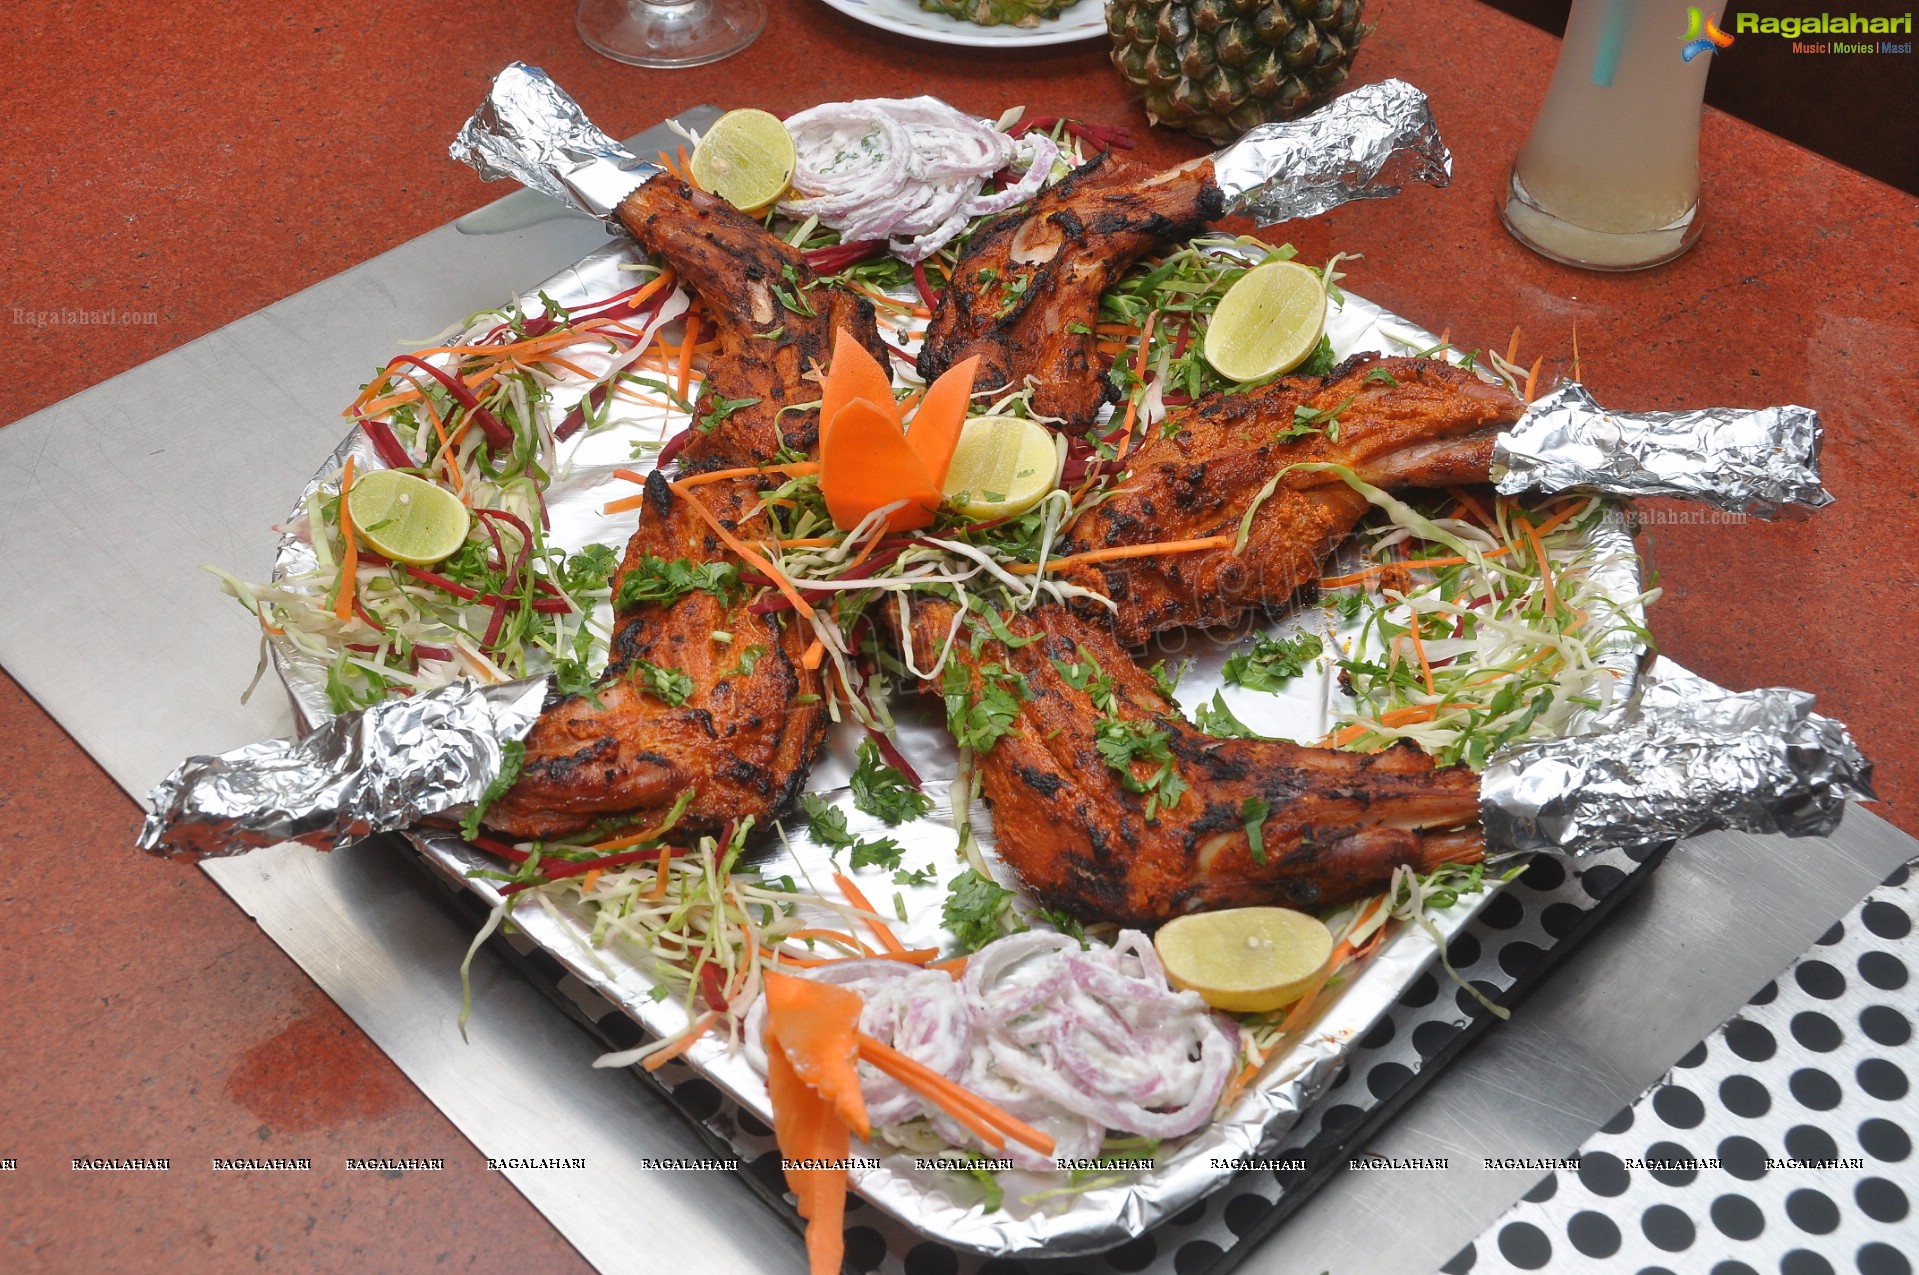 36 Bar B-Q and 36 Chattees 10-Day Hyderabadi Food Festival